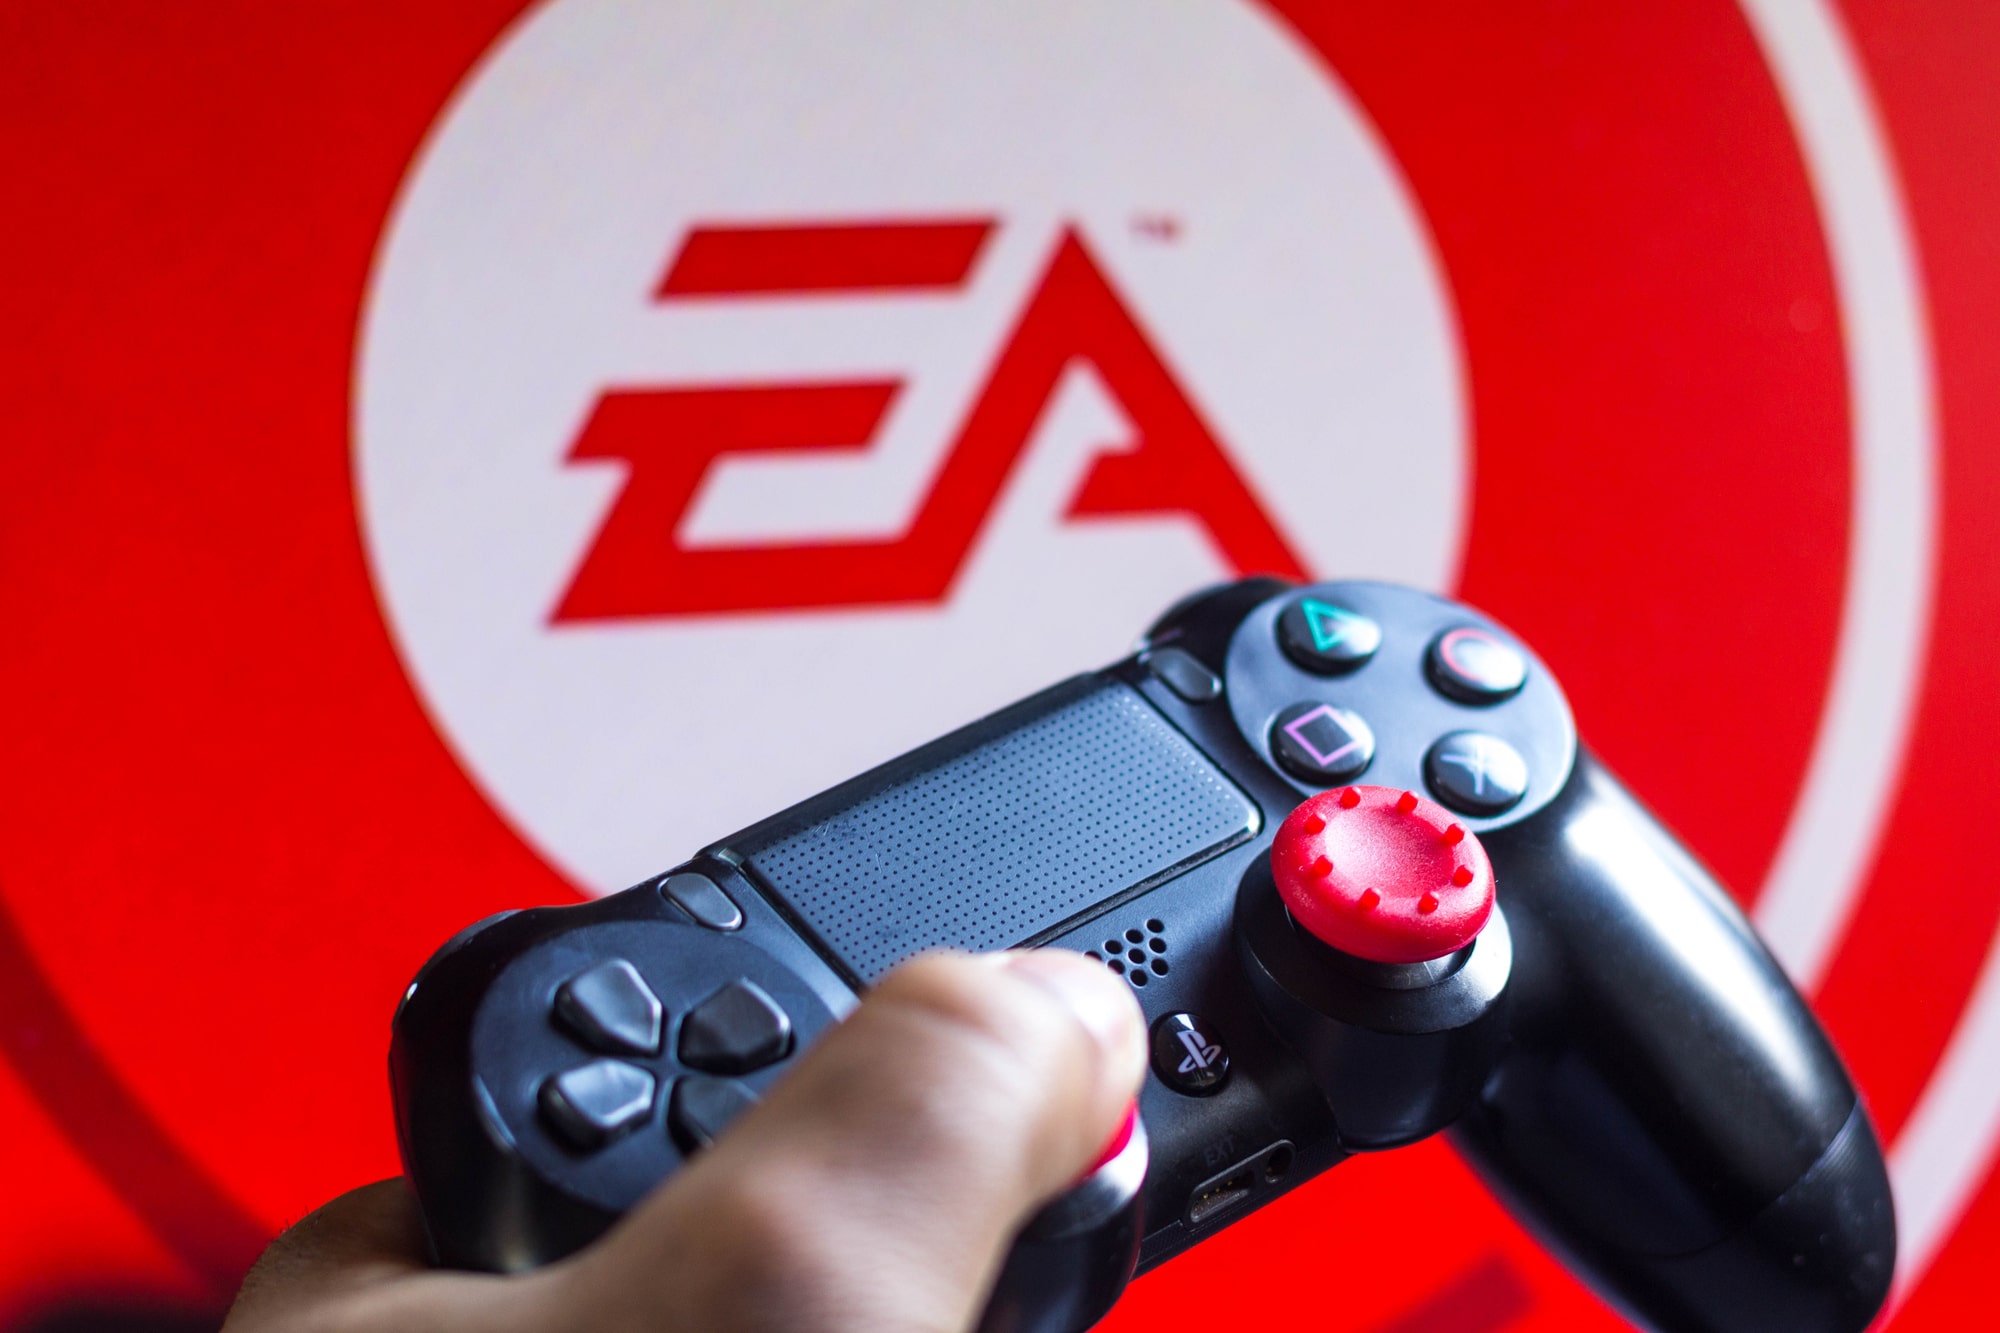 Electronic Arts CEO says NFTs are ‘an important part of the future’ of gaming